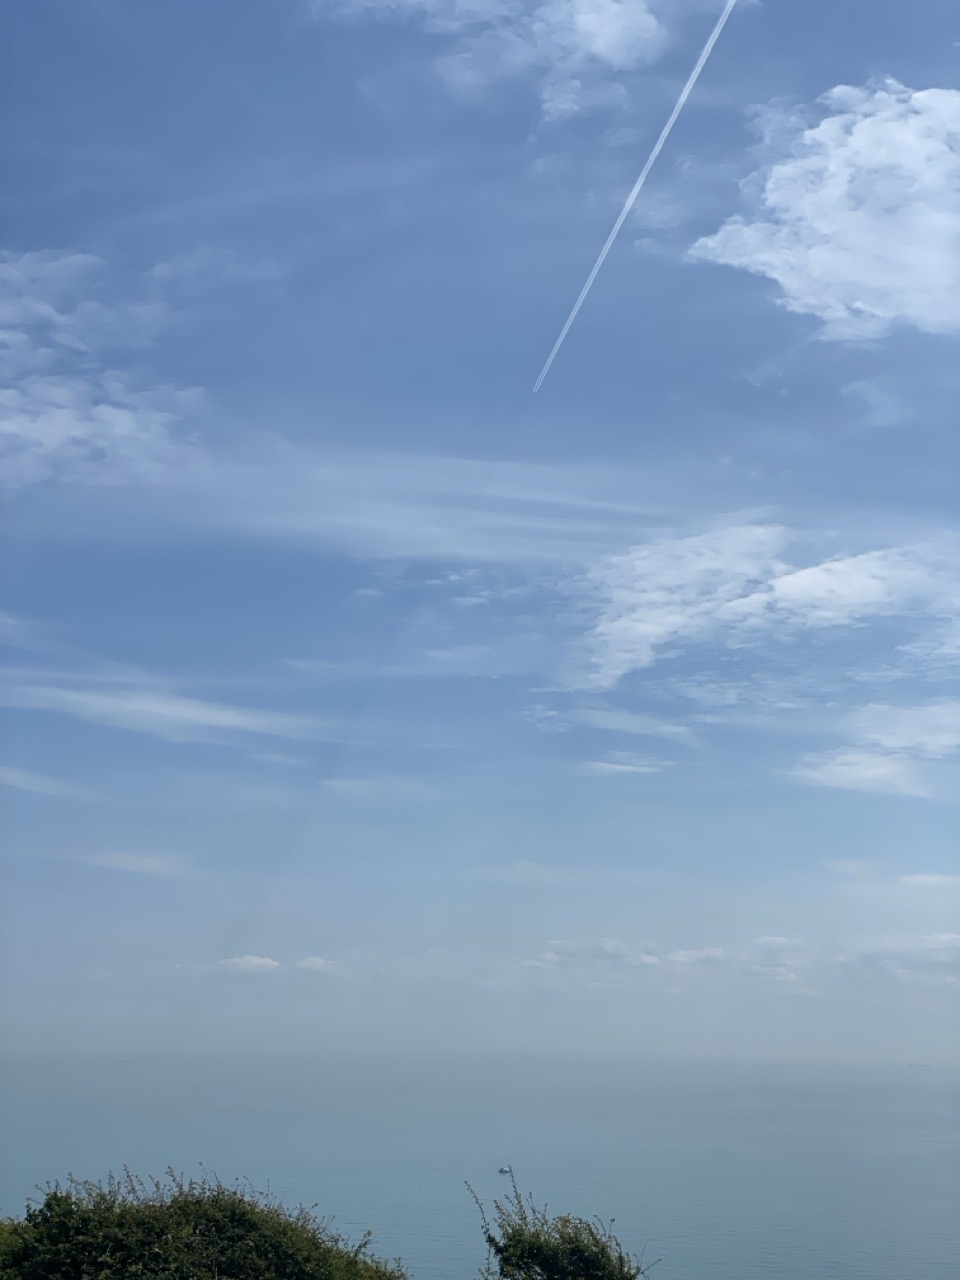 A blue sky over the sea with a jet contrail and a shadow extending from it towards the horizon.